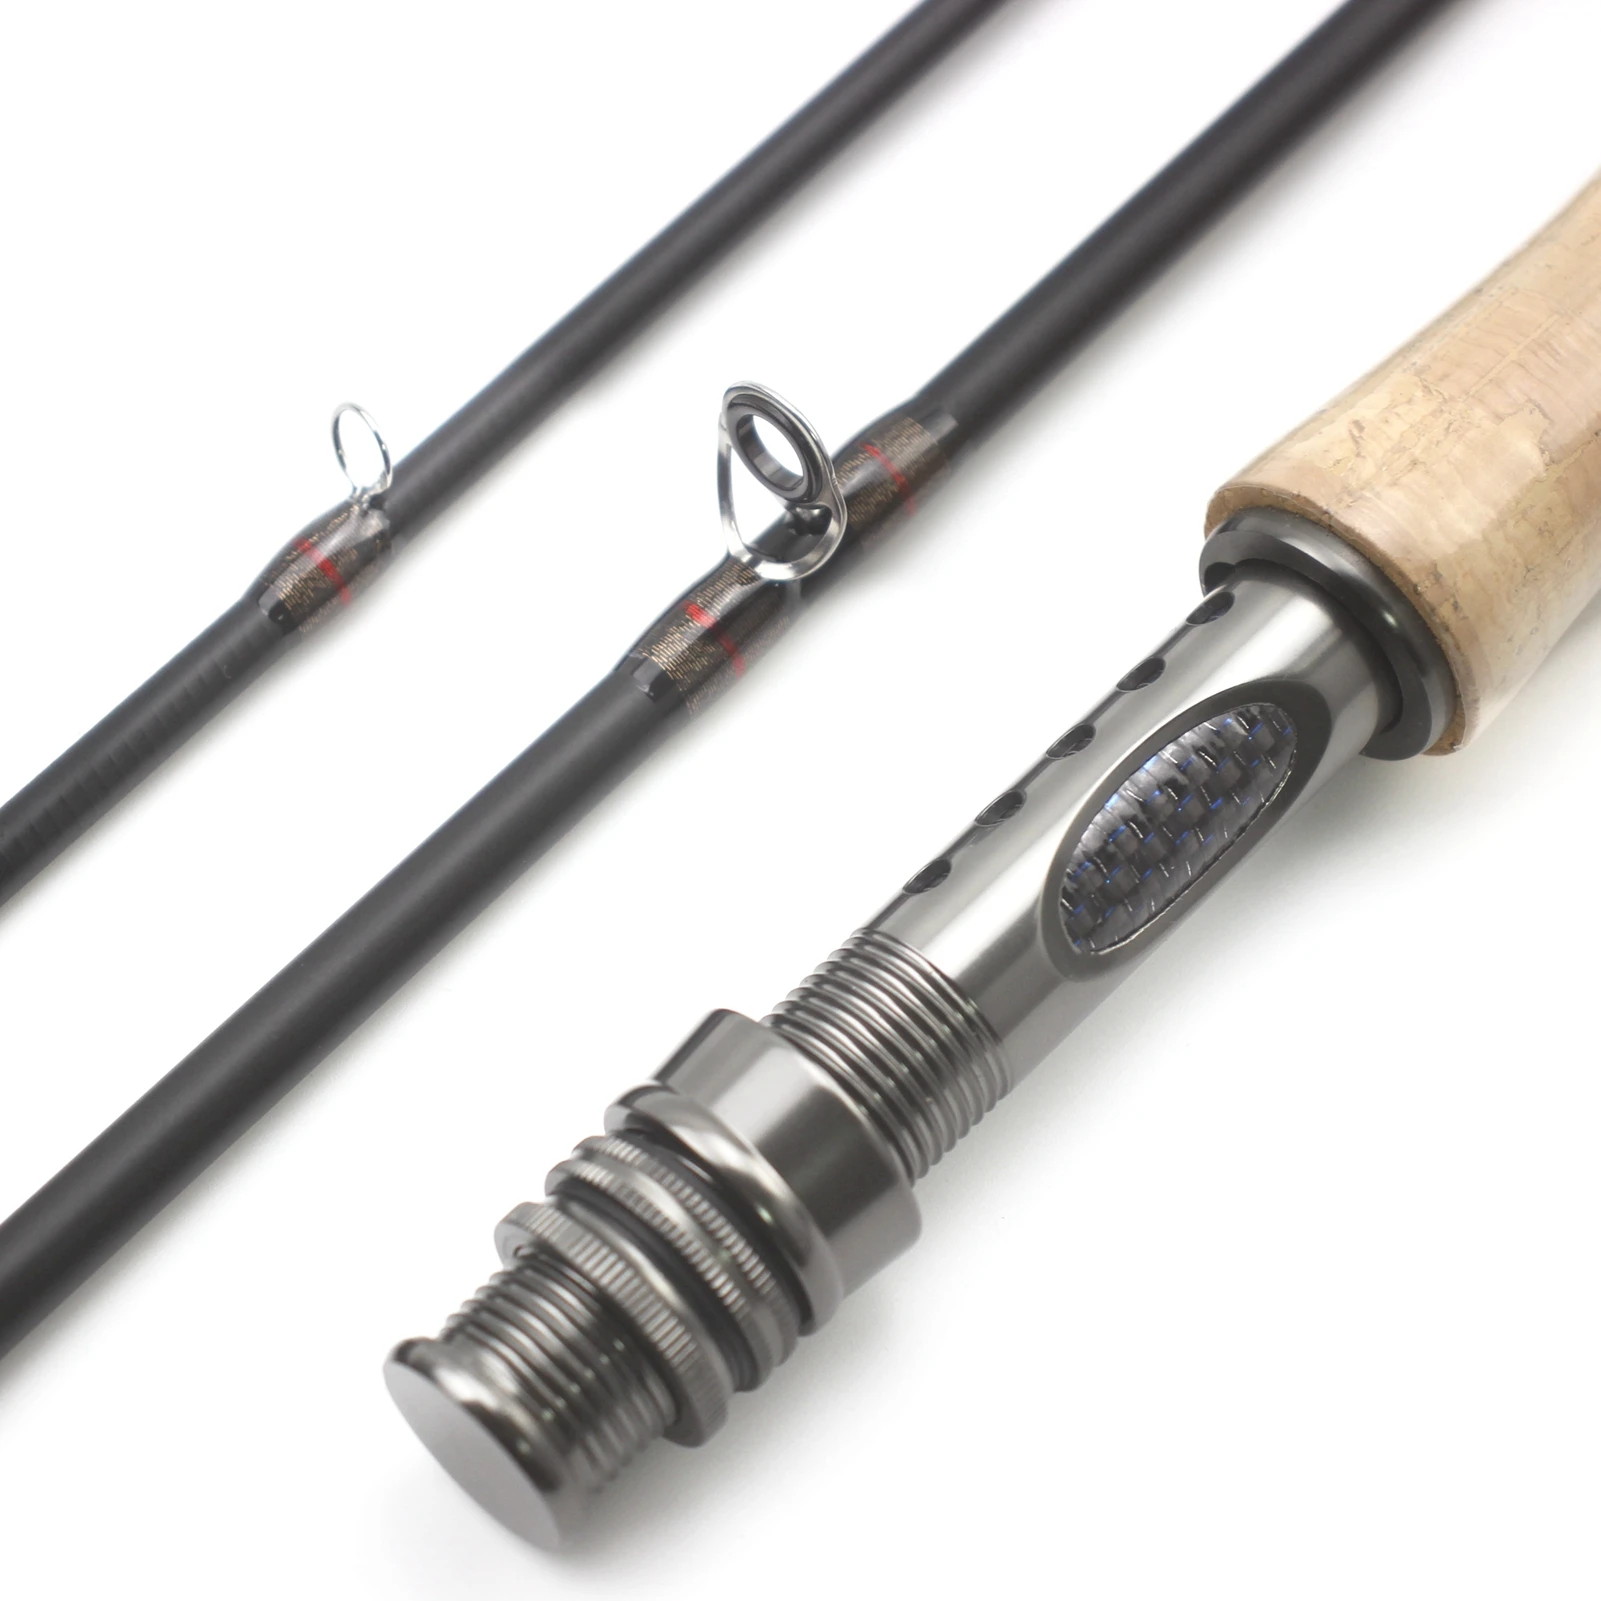 8FT 9FT Fly Fishing Rod Carbon Fiber Cork Handle 4 Section Lightweight  Pikes Fish trout Pole Lake River Stream Fly Rod